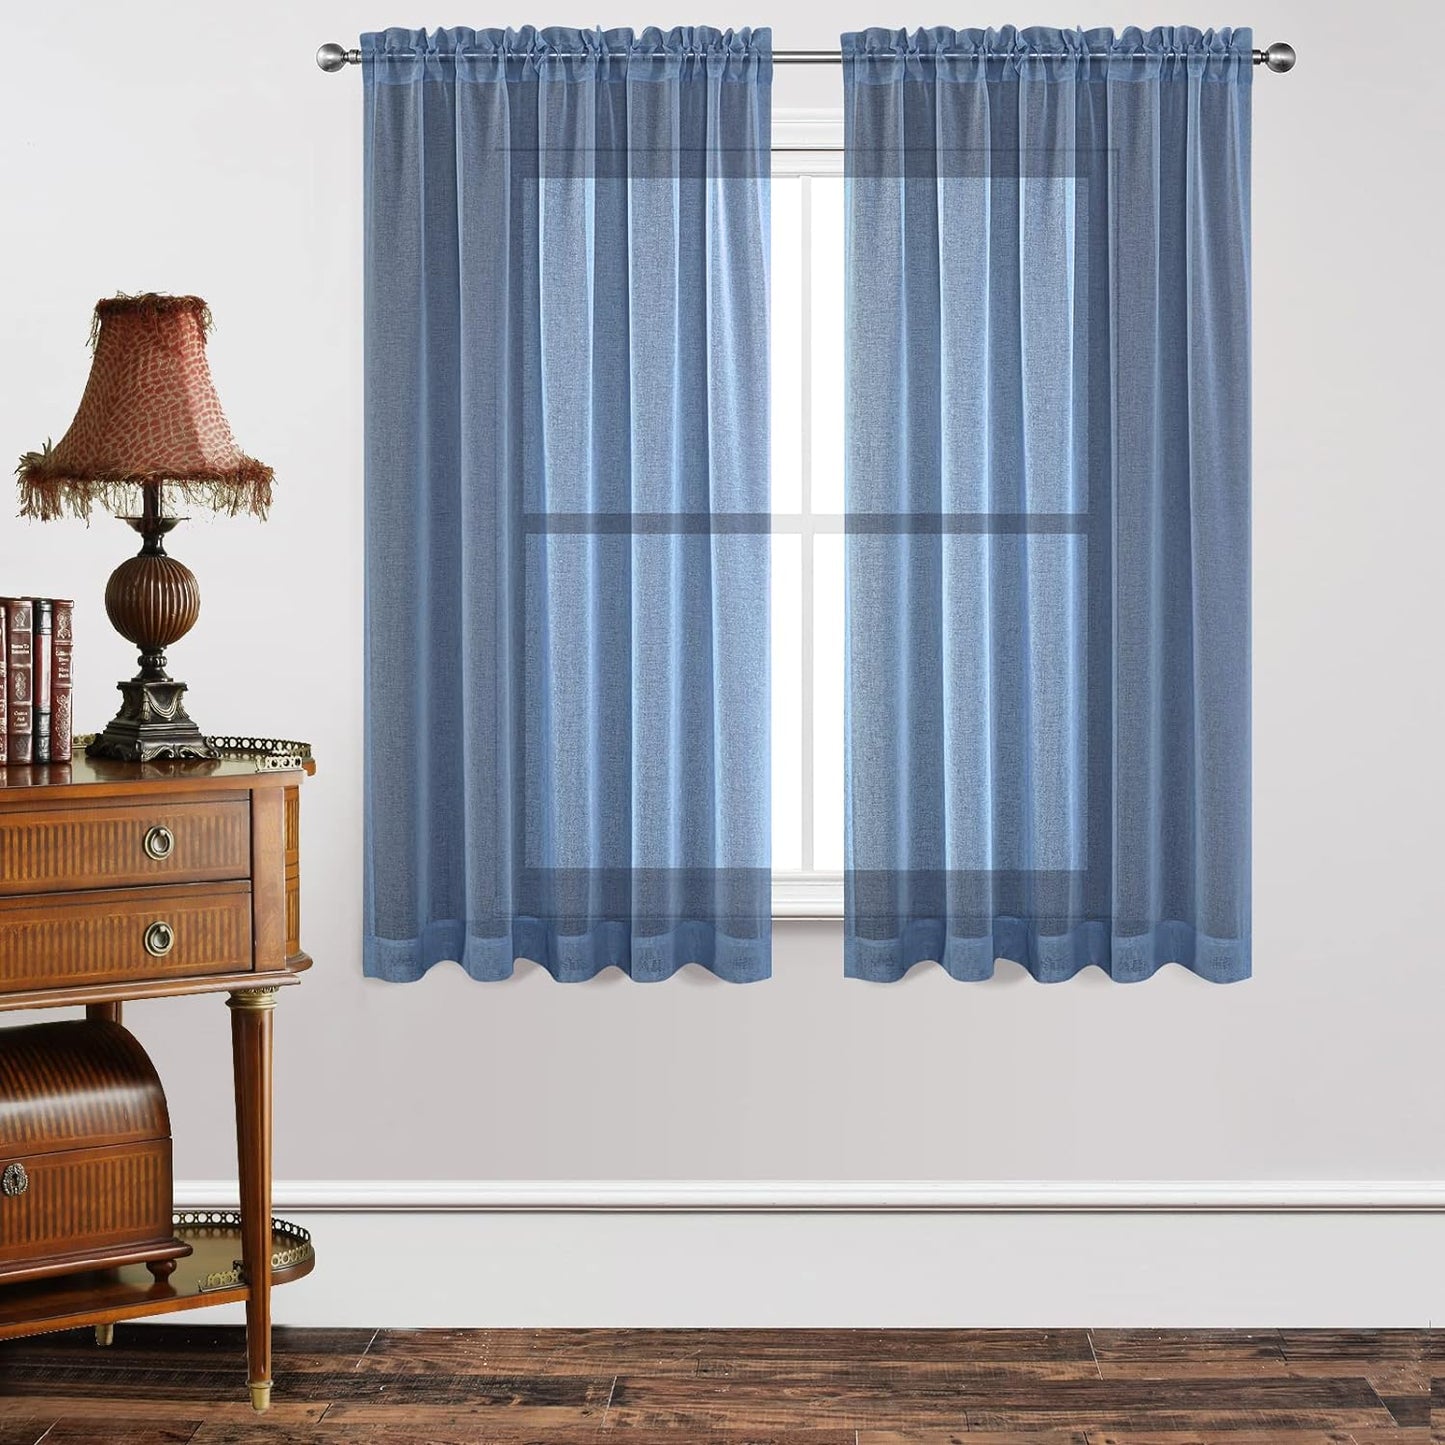 Joydeco White Sheer Curtains 63 Inch Length 2 Panels Set, Rod Pocket Long Sheer Curtains for Window Bedroom Living Room, Lightweight Semi Drape Panels for Yard Patio (54X63 Inch, off White)  Joydeco Navy Blue 54W X 63L Inch X 2 Panels 